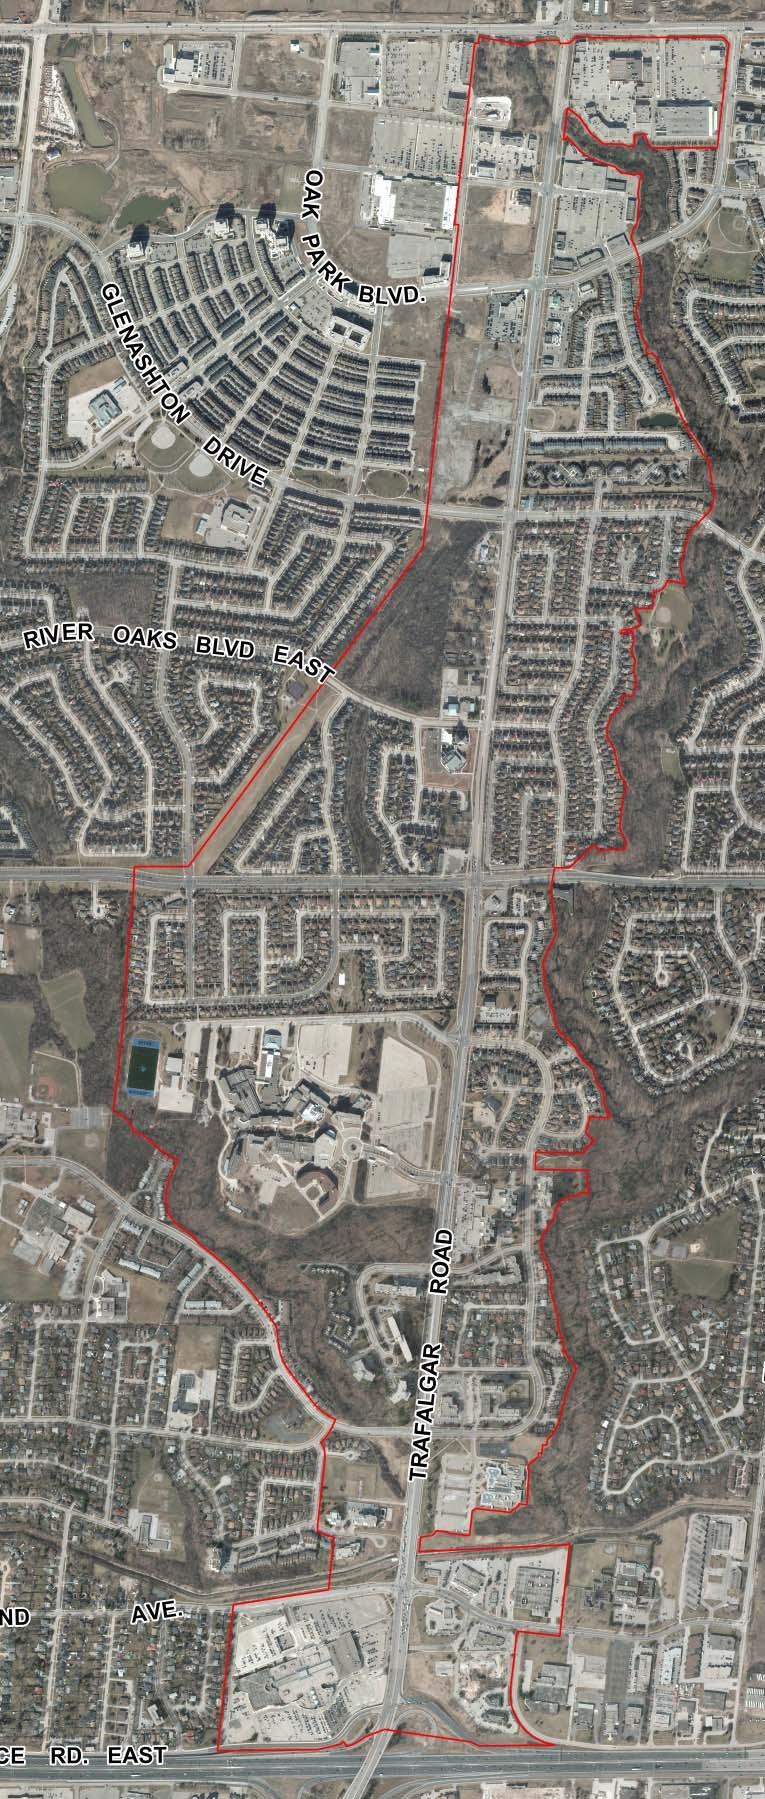 Overview The Livable Oakville Plan identifies the lands along Trafalgar Road, between the QEW and Dundas Street, as a corridor to be studied to identify opportunities for future development